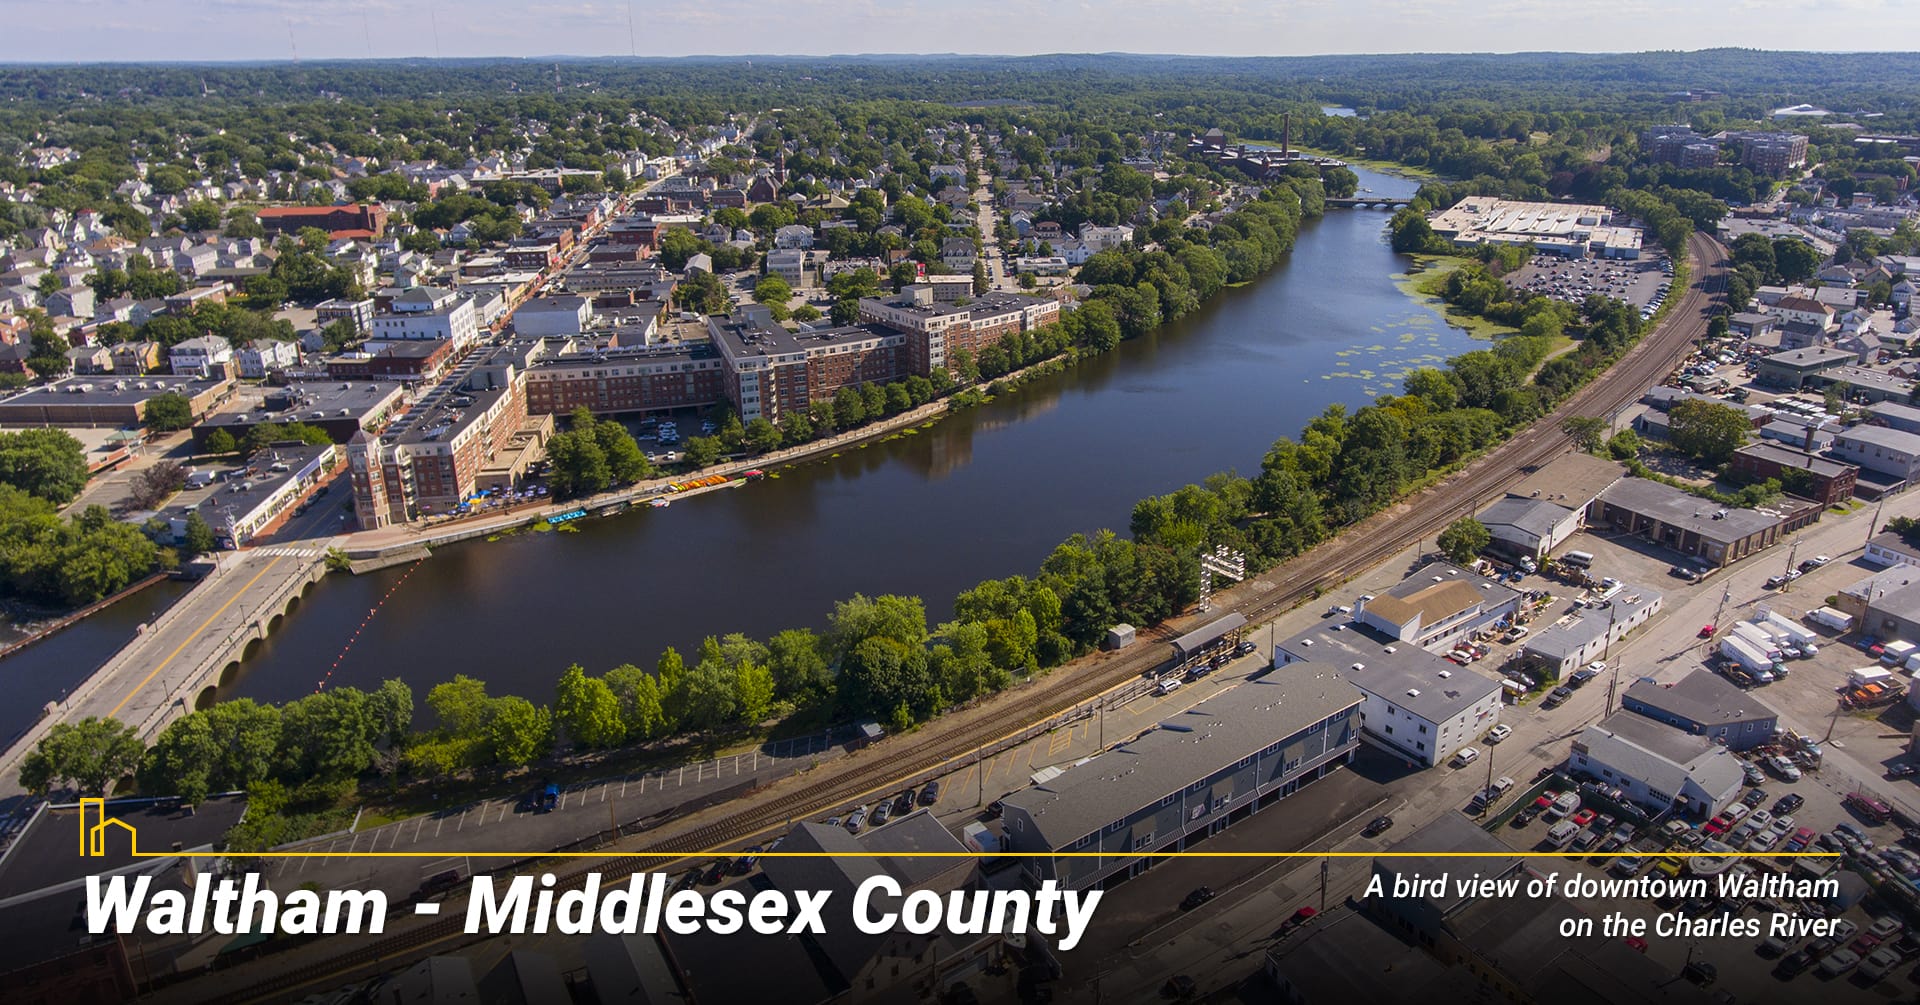 Waltham - Middlesex County